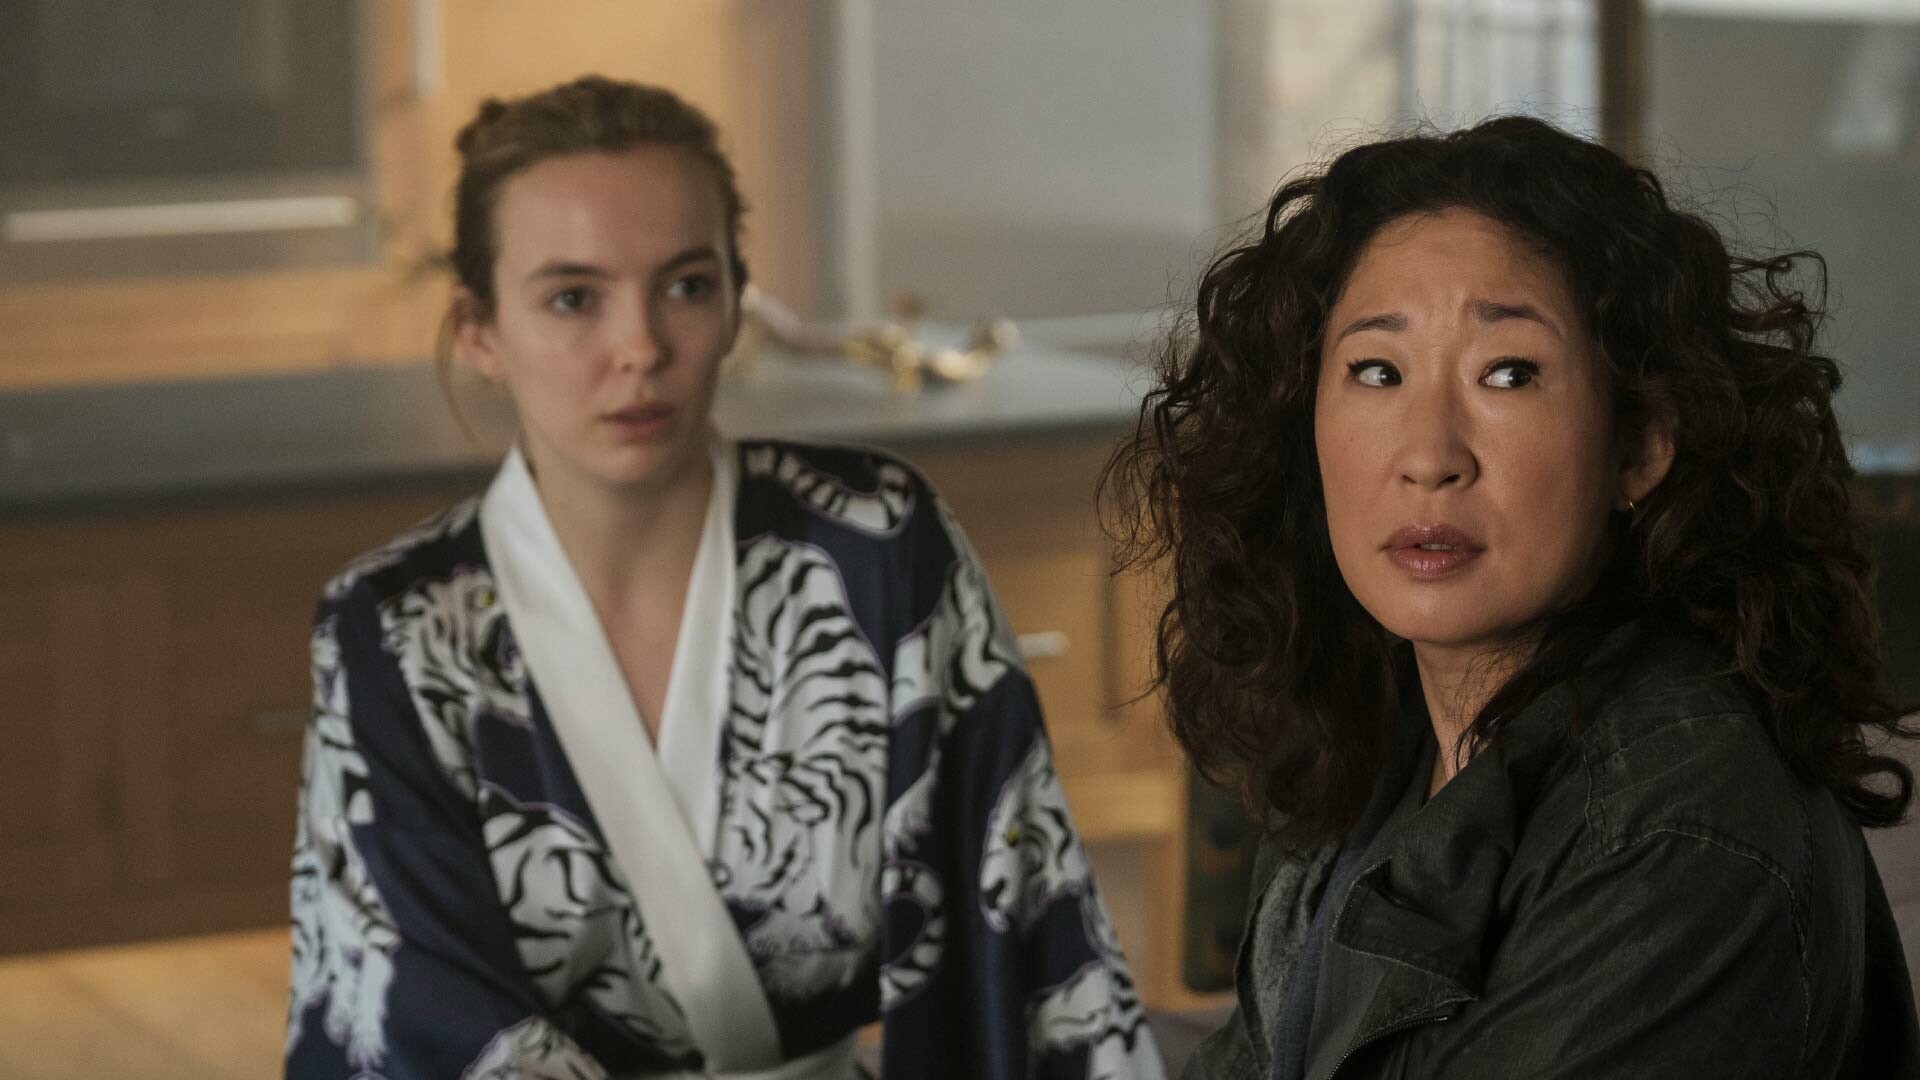 Killing Eve: The title of each episode is taken from a line said by a character within that same episode. 1920x1080 Full HD Wallpaper.